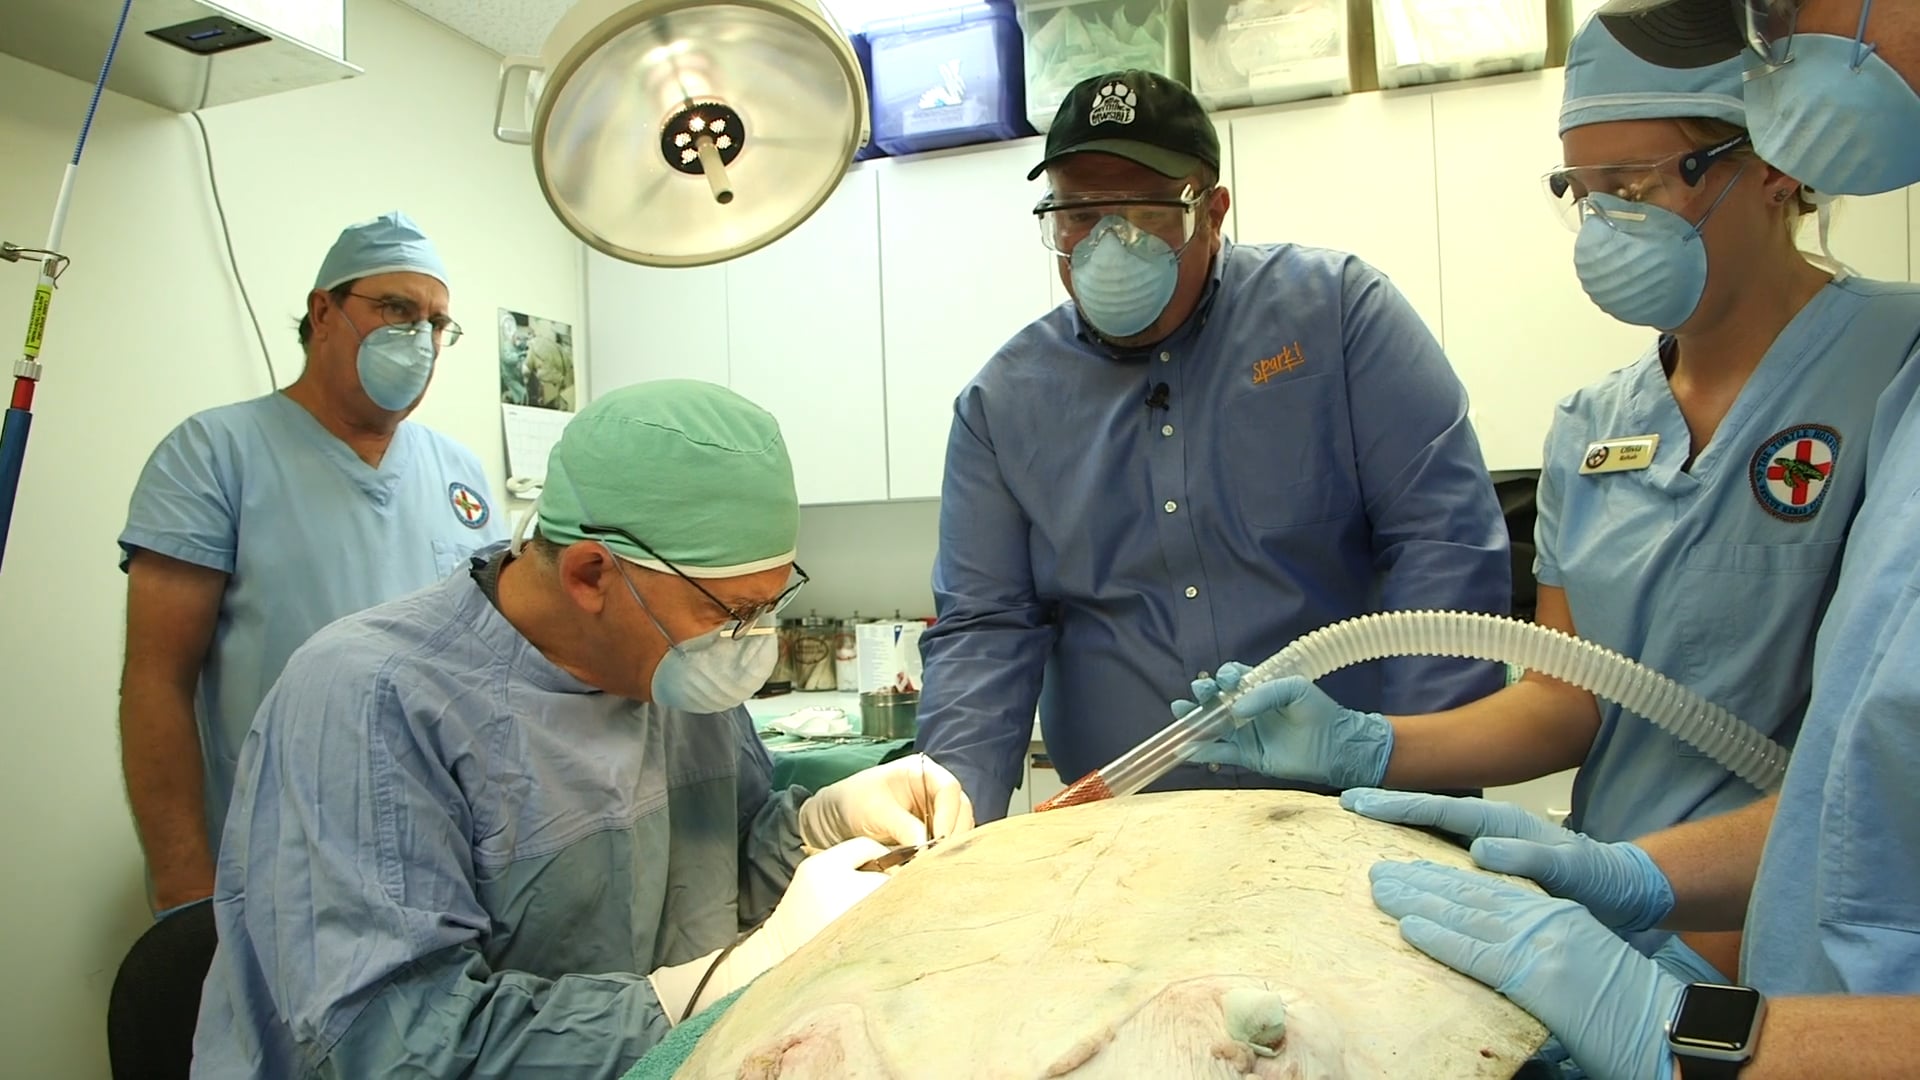 Saving the Sea Turtles with Veterinarian Dr. Mader